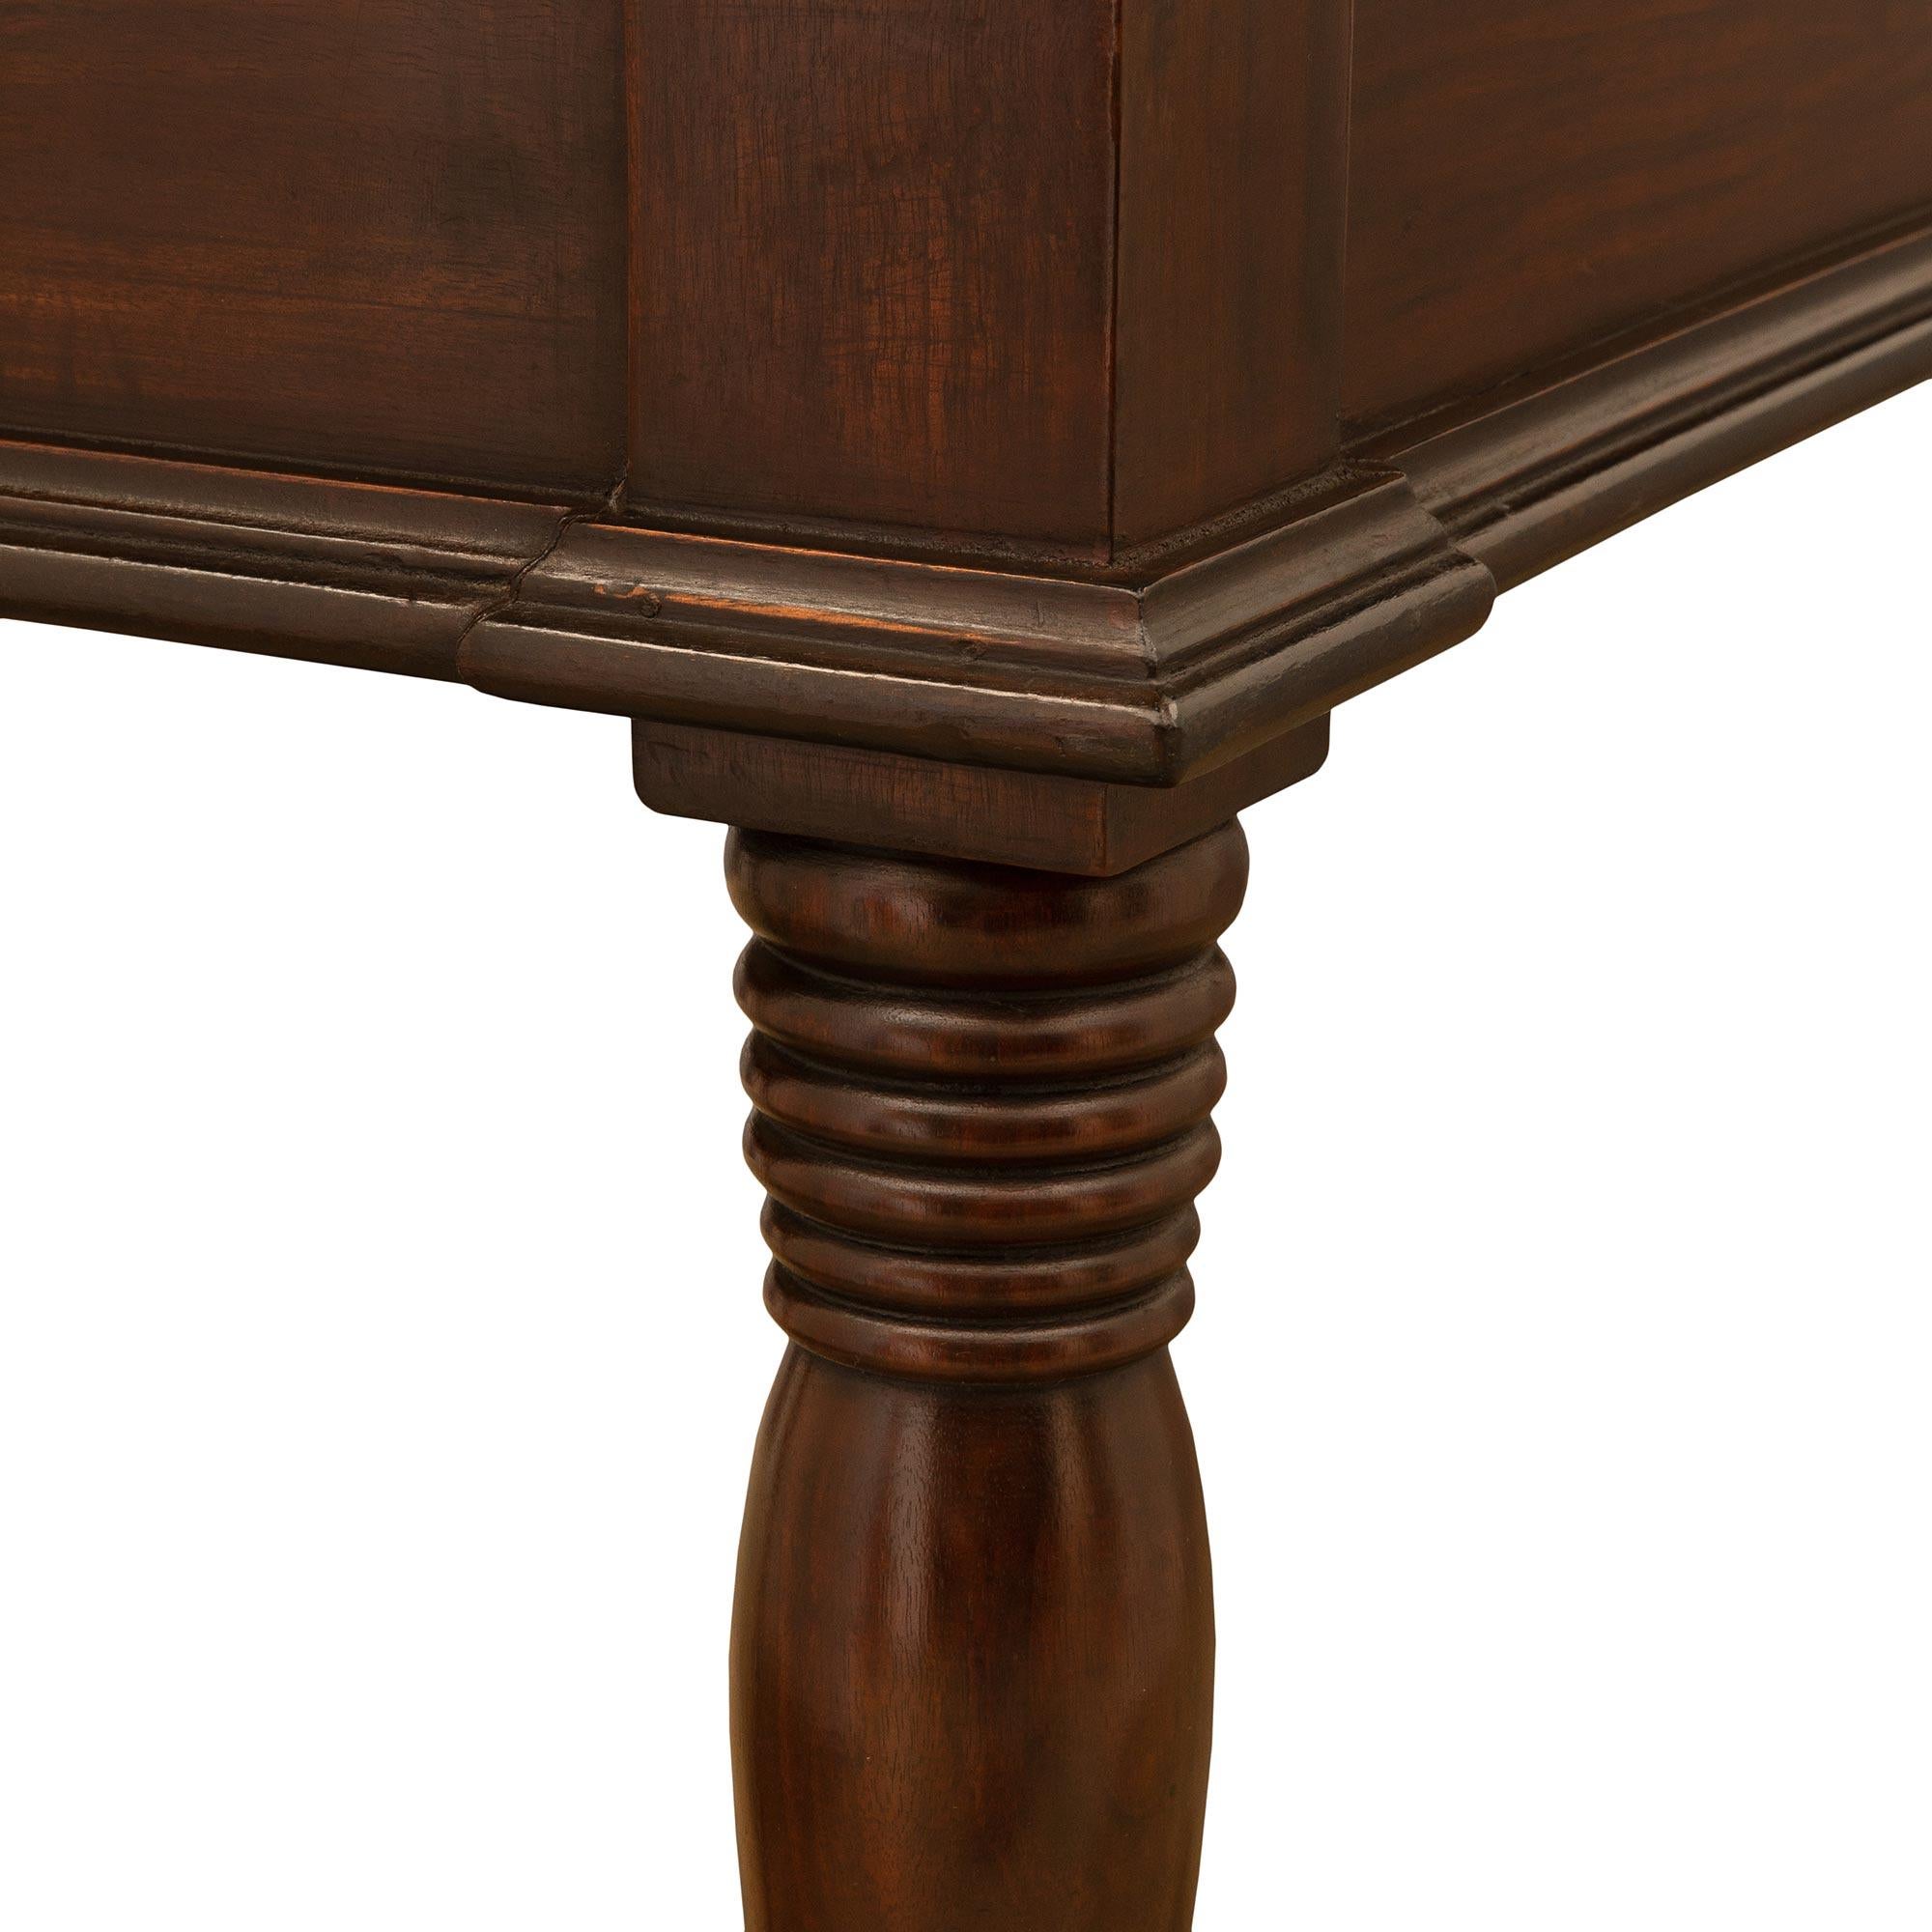 Italian 19th Century Tuscan St. Walnut and Scagliola Center Table For Sale 5